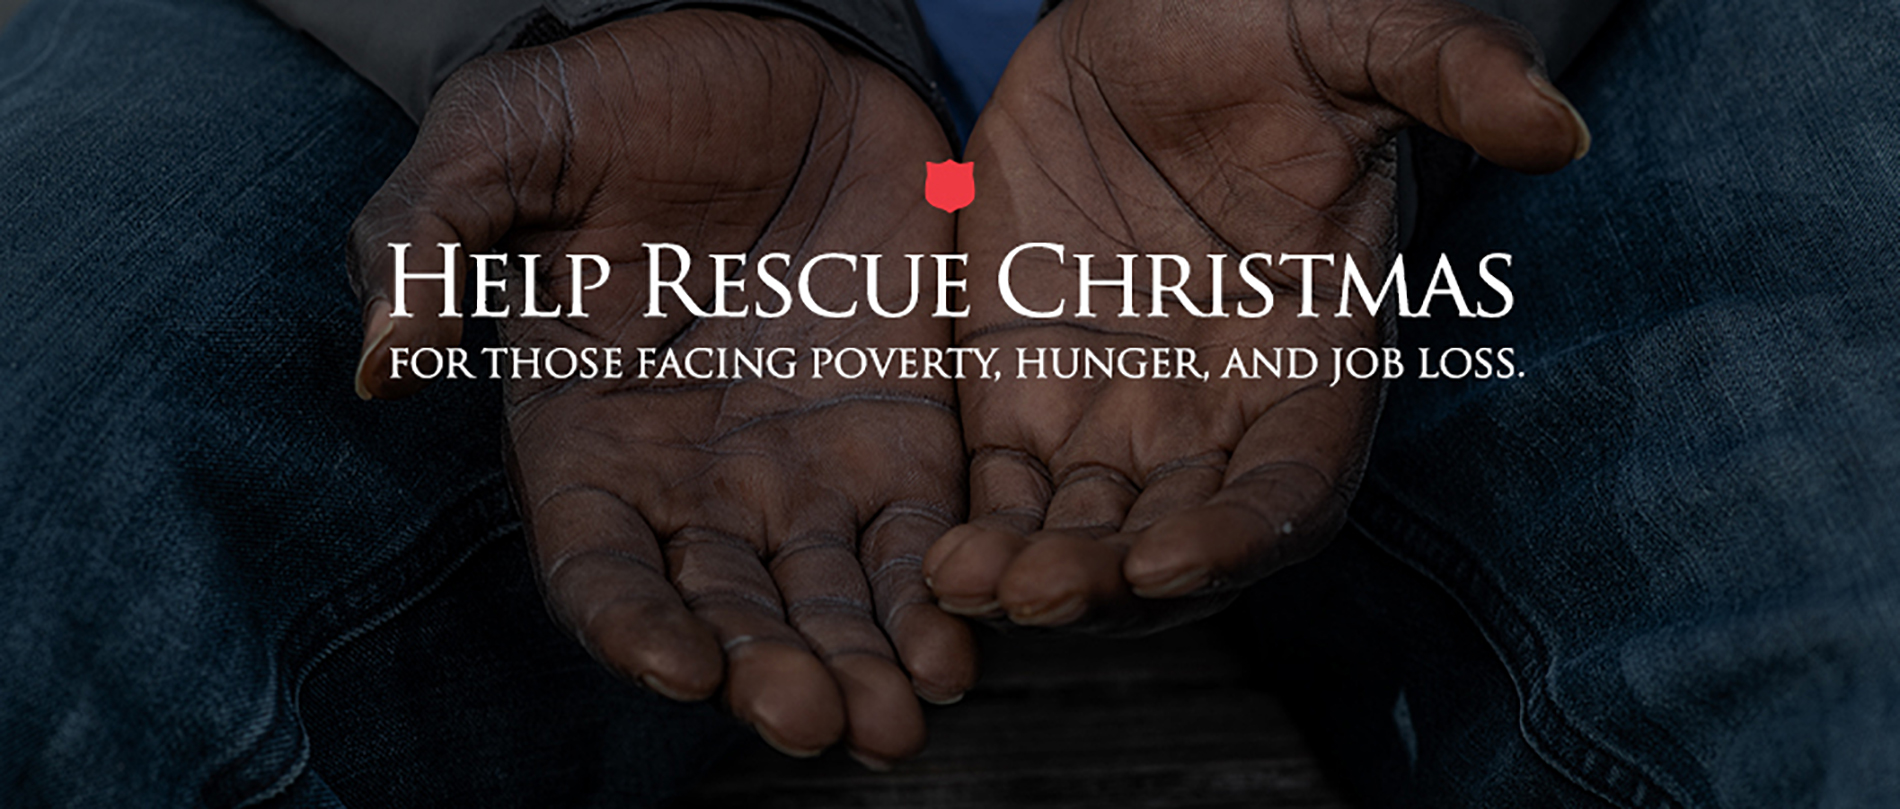 Help Rescue Christmas - Salvation Army banner